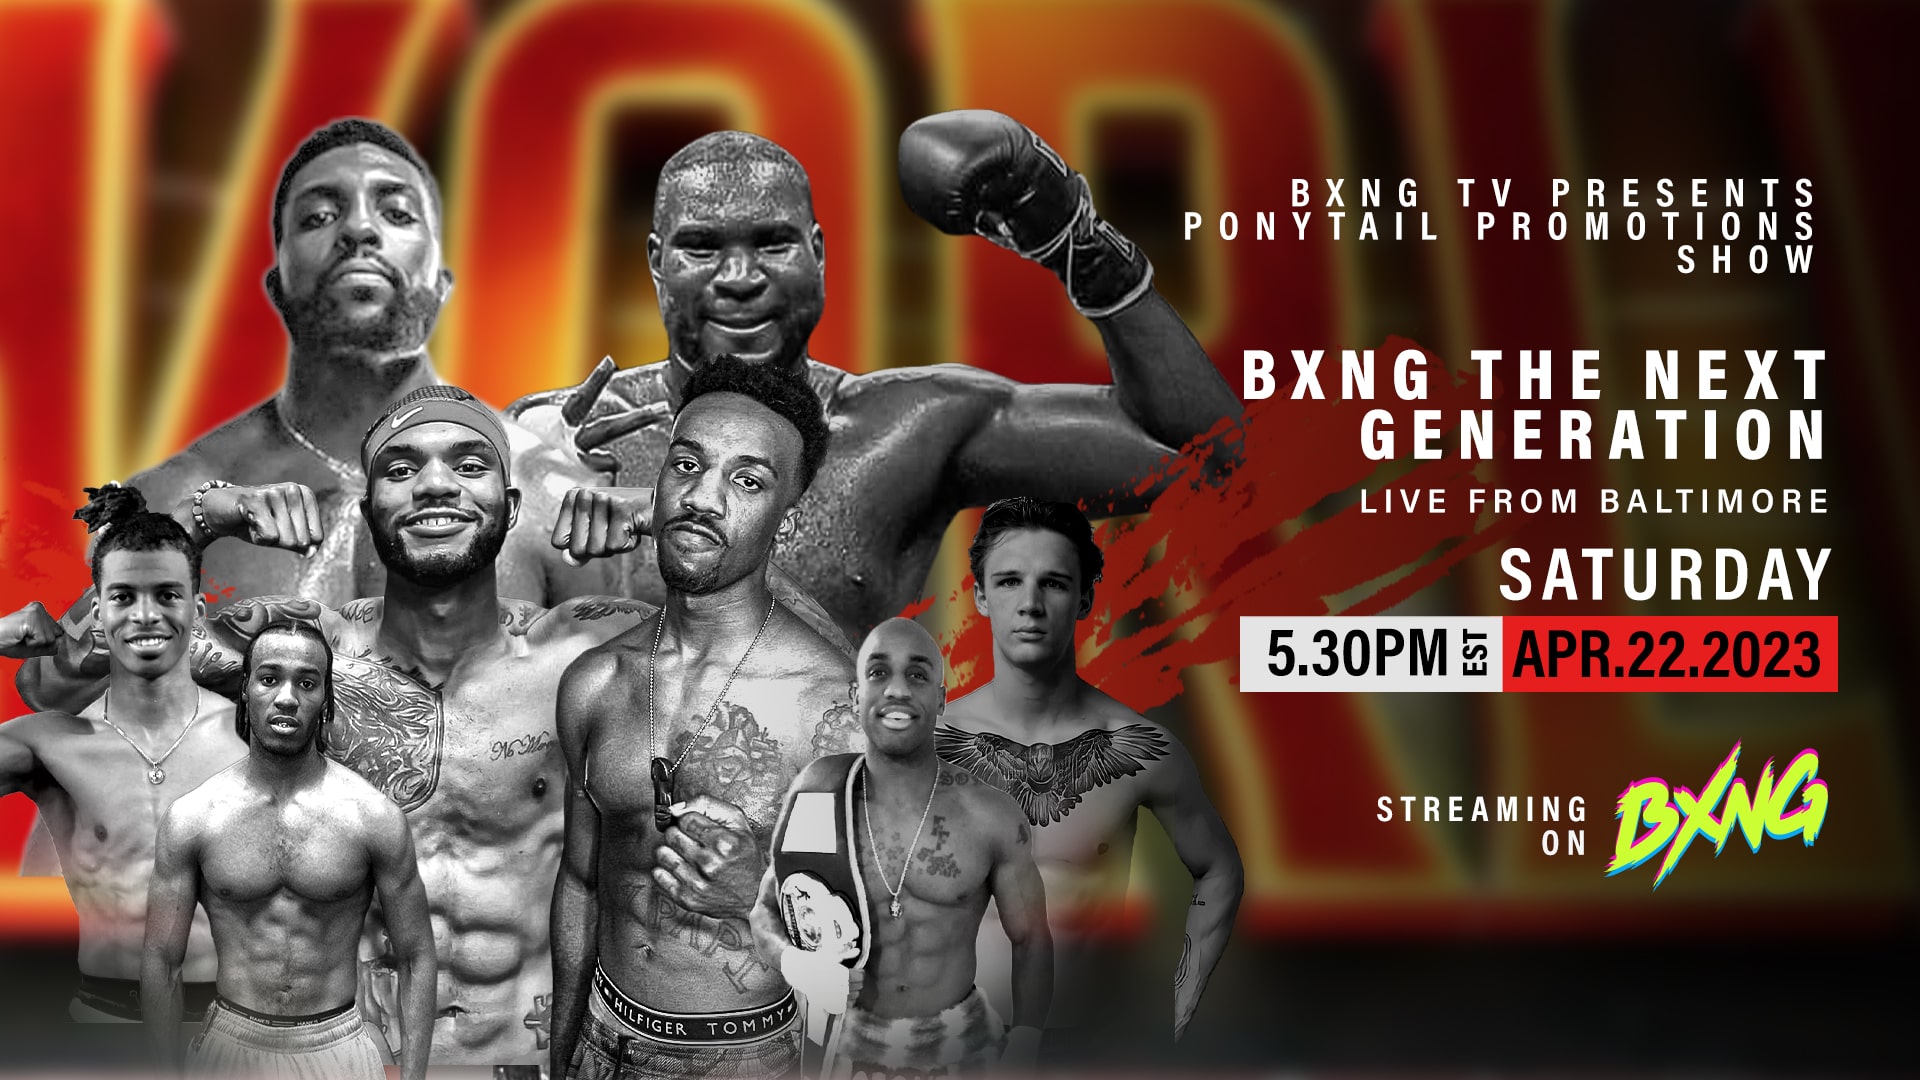 BXNG TV Presents Ponytail Promotions Show Live Stream 04/22/23